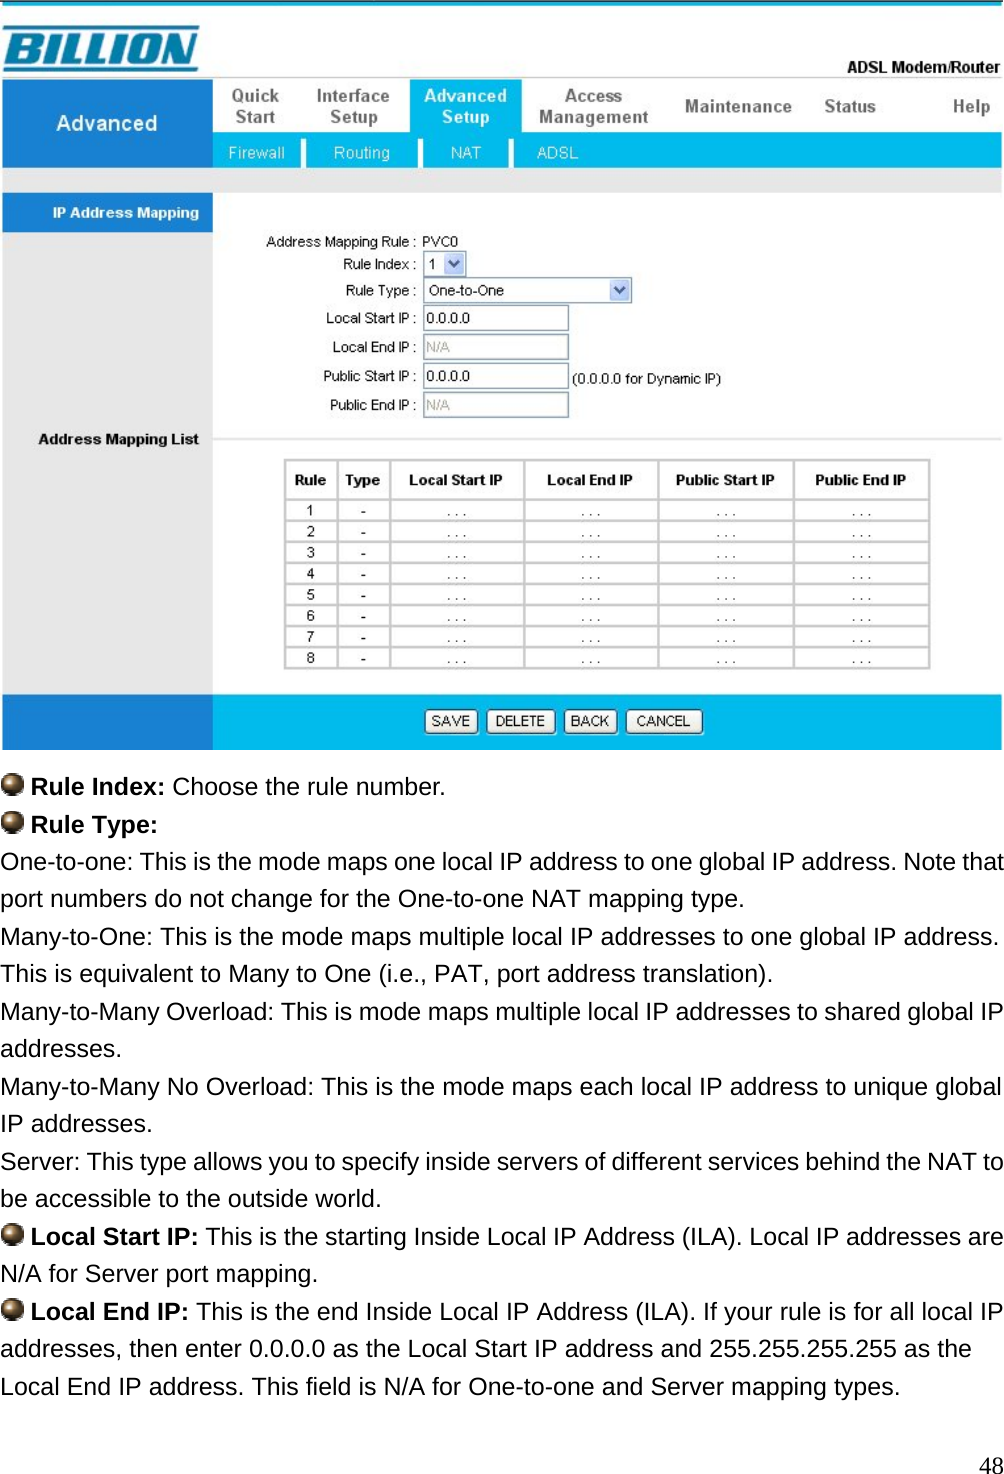   Rule Index: Choose the rule number.  Rule Type: One-to-one: This is the mode maps one local IP address to one global IP address. Note that port numbers do not change for the One-to-one NAT mapping type. Many-to-One: This is the mode maps multiple local IP addresses to one global IP address. This is equivalent to Many to One (i.e., PAT, port address translation). Many-to-Many Overload: This is mode maps multiple local IP addresses to shared global IP addresses. Many-to-Many No Overload: This is the mode maps each local IP address to unique global IP addresses. Server: This type allows you to specify inside servers of different services behind the NAT to be accessible to the outside world.  Local Start IP: This is the starting Inside Local IP Address (ILA). Local IP addresses are N/A for Server port mapping.  Local End IP: This is the end Inside Local IP Address (ILA). If your rule is for all local IP addresses, then enter 0.0.0.0 as the Local Start IP address and 255.255.255.255 as the Local End IP address. This field is N/A for One-to-one and Server mapping types.  48